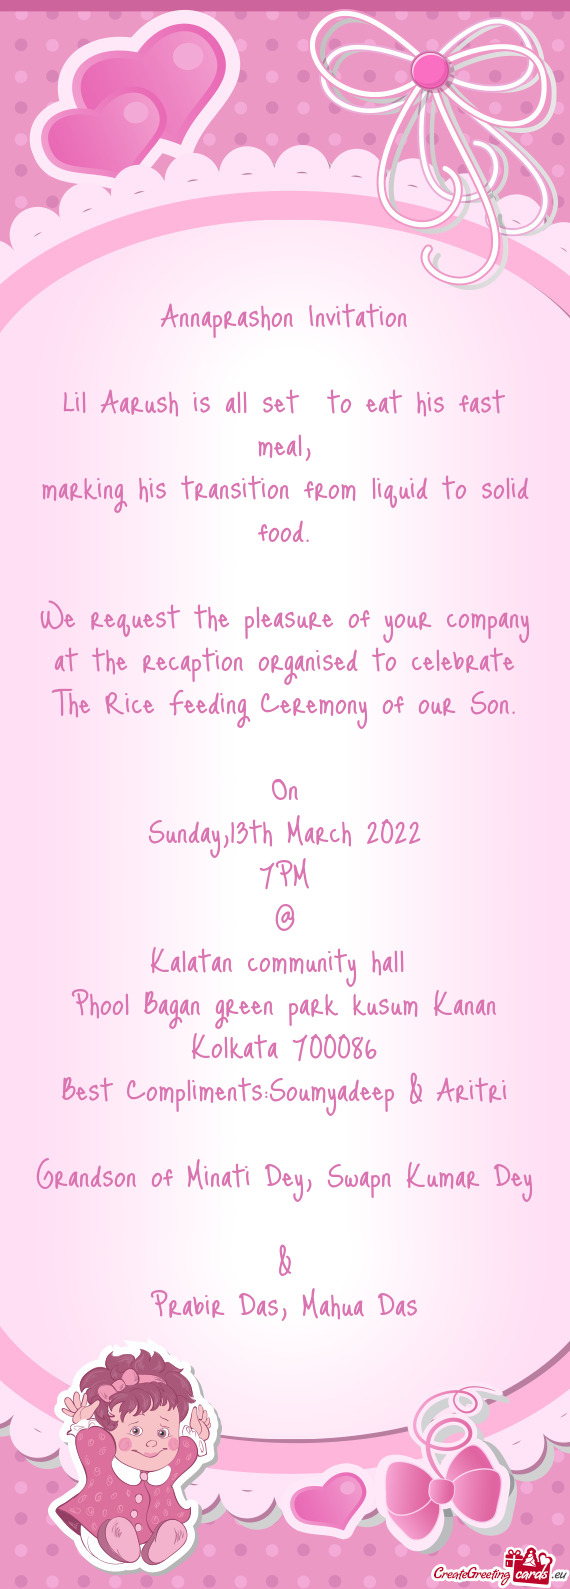 We request the pleasure of your company at the recaption organised to celebrate The Rice Feeding Cer